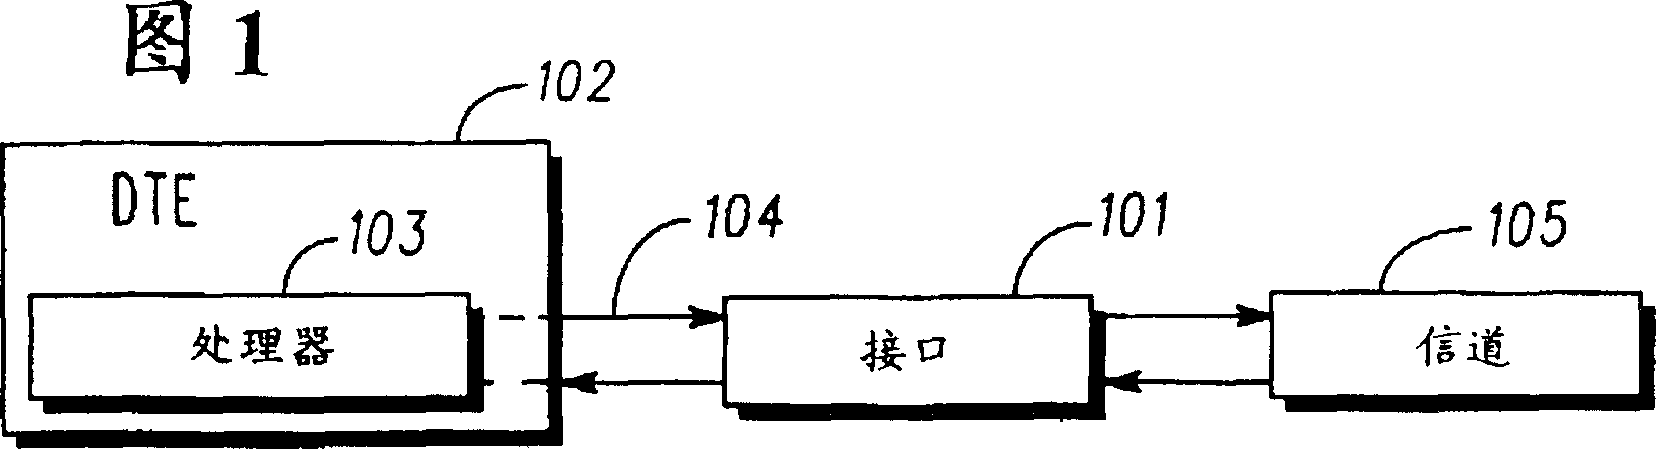 Interface between communications channel and processor